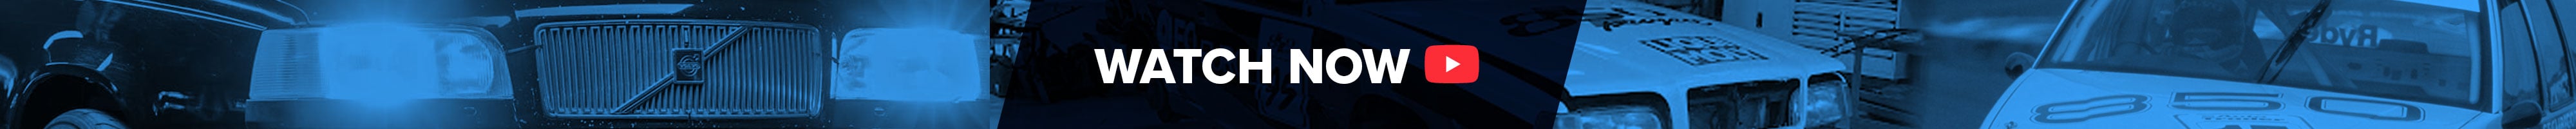 GE-watch-now-banner